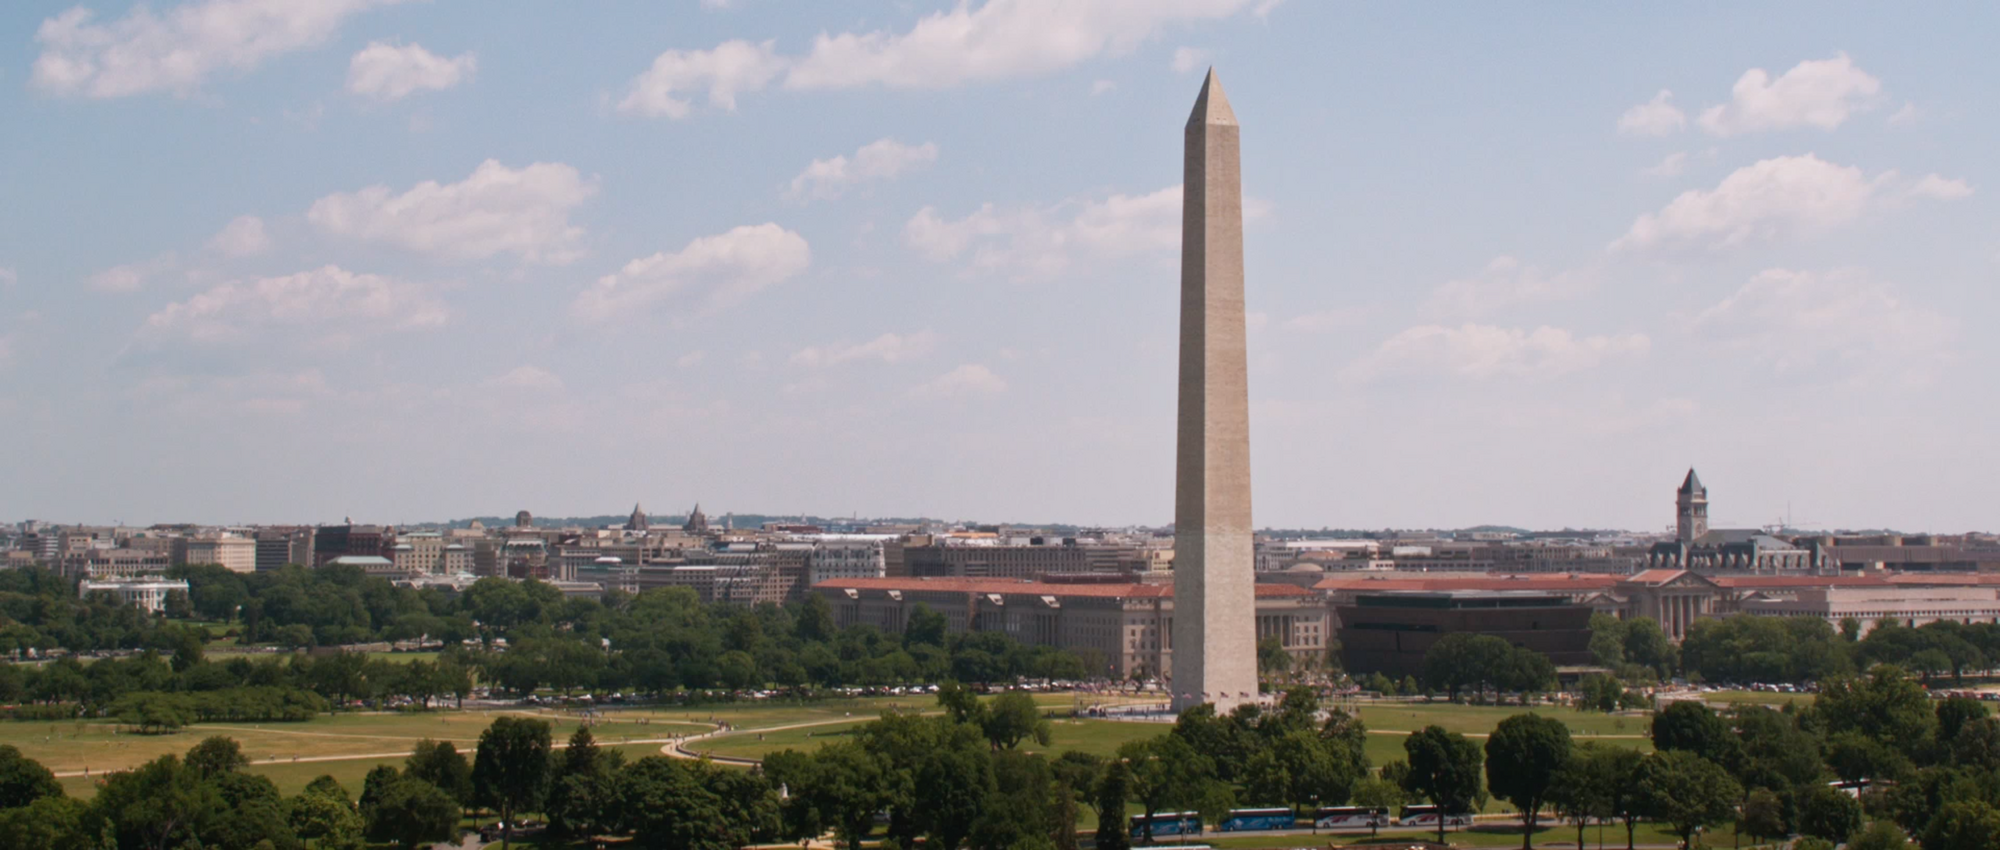 The ultimate guide to House of Cards filming locations